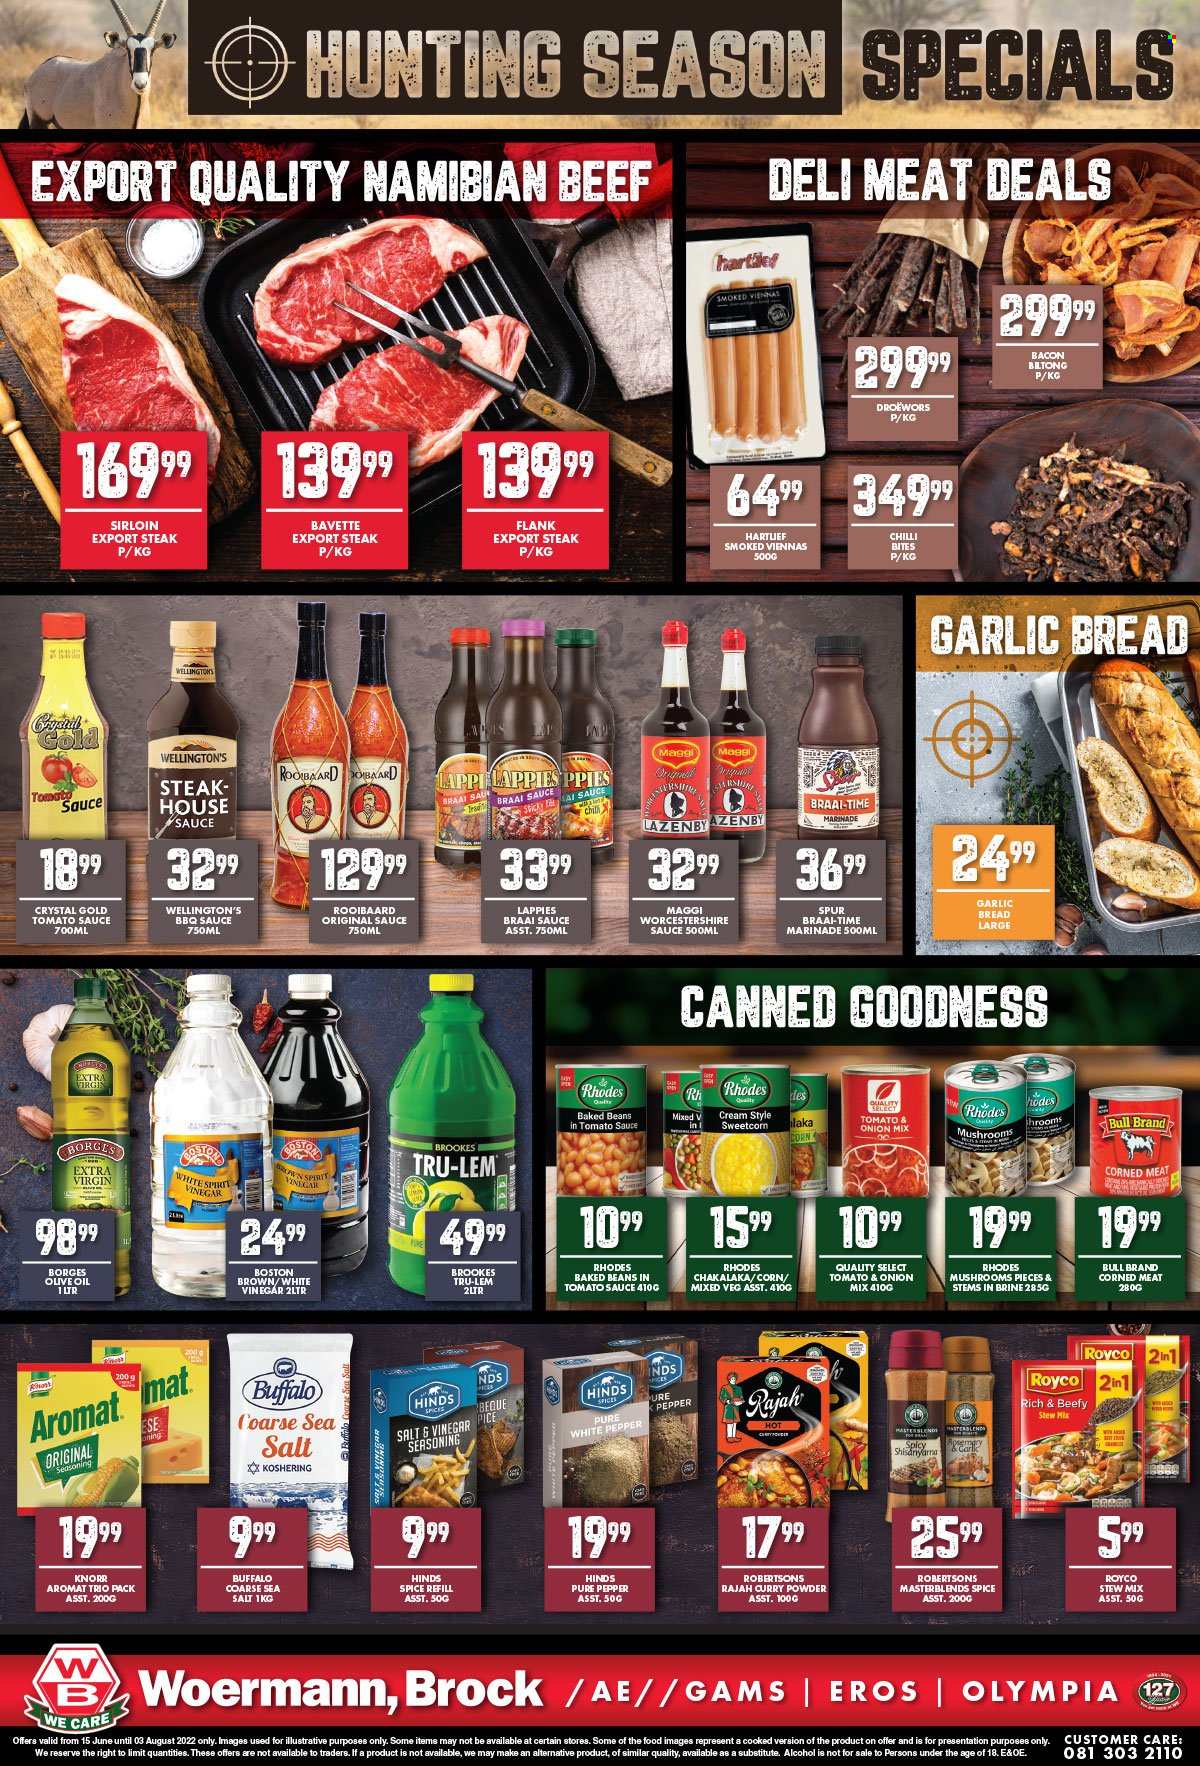 Woermann Brock catalogue  - 15/06/2022 - 03/08/2022 - Sales products - mushroom, bread, beans, corn, Knorr, chakalaka, bacon, vienna sausage, Maggi, sea salt, corned meat, baked beans, Borges, spice, curry powder, Hinds, BBQ sauce, worcestershire sauce, marinade, extra virgin olive oil, vinegar, olive oil, oil, alcohol, steak, Brut. Page 2.